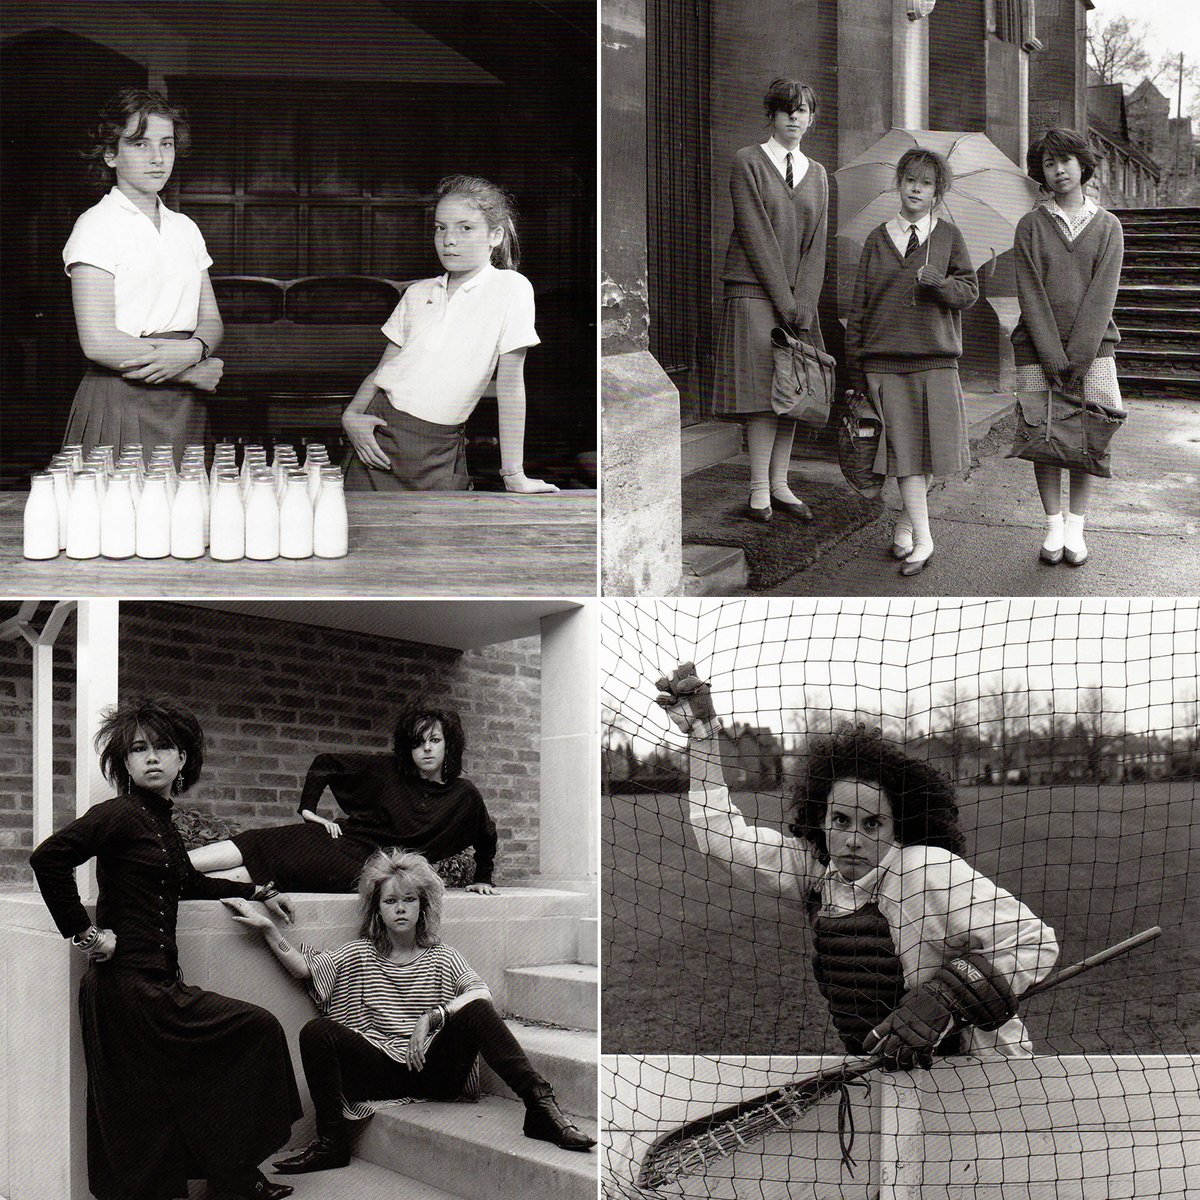 Who also loves an Eighties throwback picture?
Sue Packer was @cheltladiescoll's Artist in Residence (1986-1988). Her photos show College life throughout this period. #1980s #fashionhistory #histchild